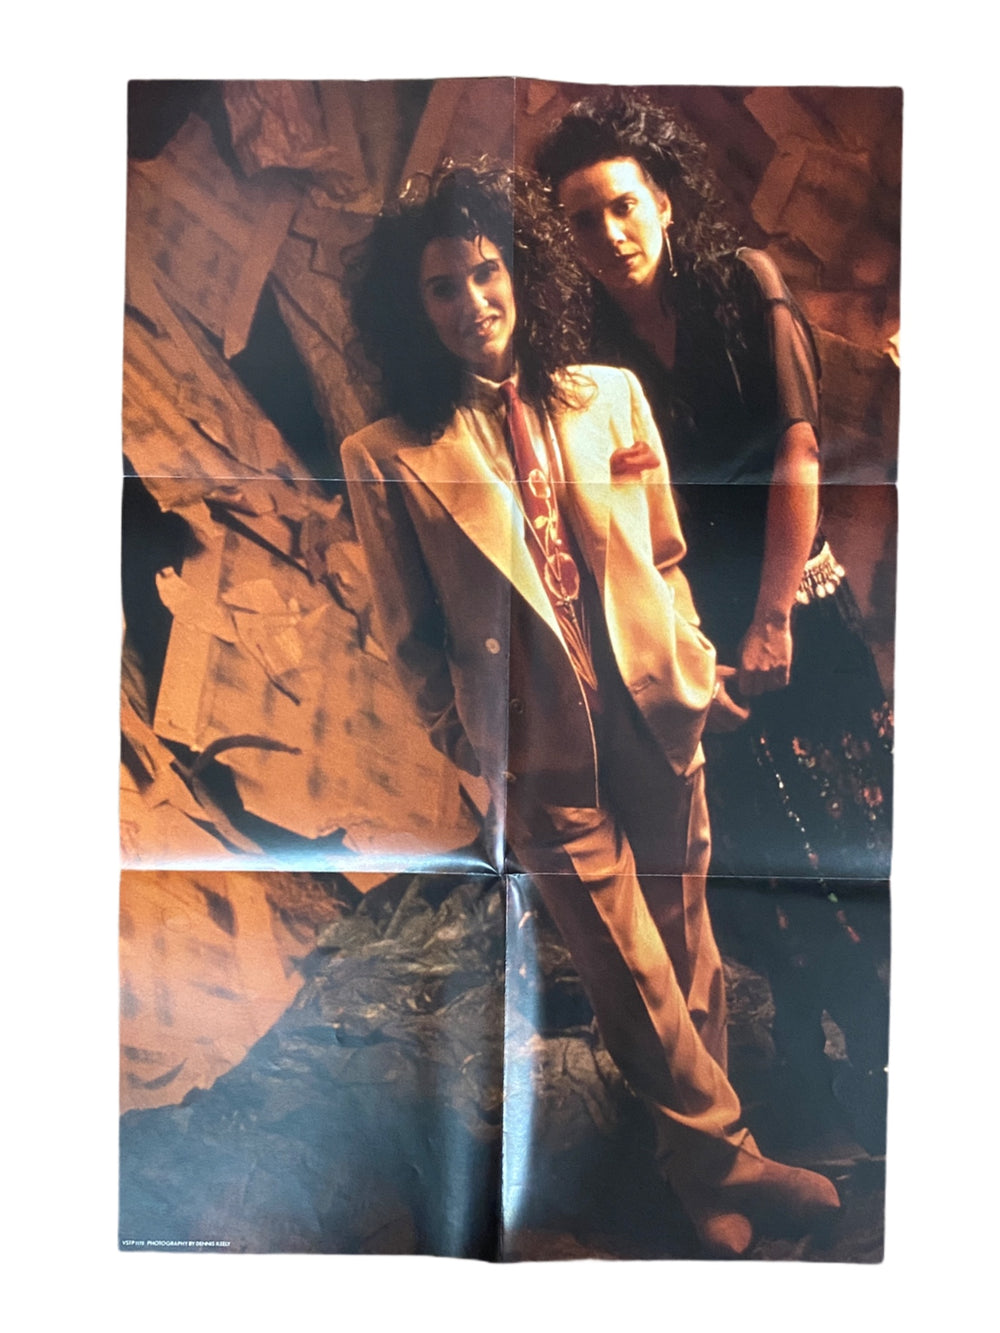 Prince – Wendy & Lisa Lolly Lolly 12 Inch Vinyl Single 1989 Original Prince WITH POSTER AS